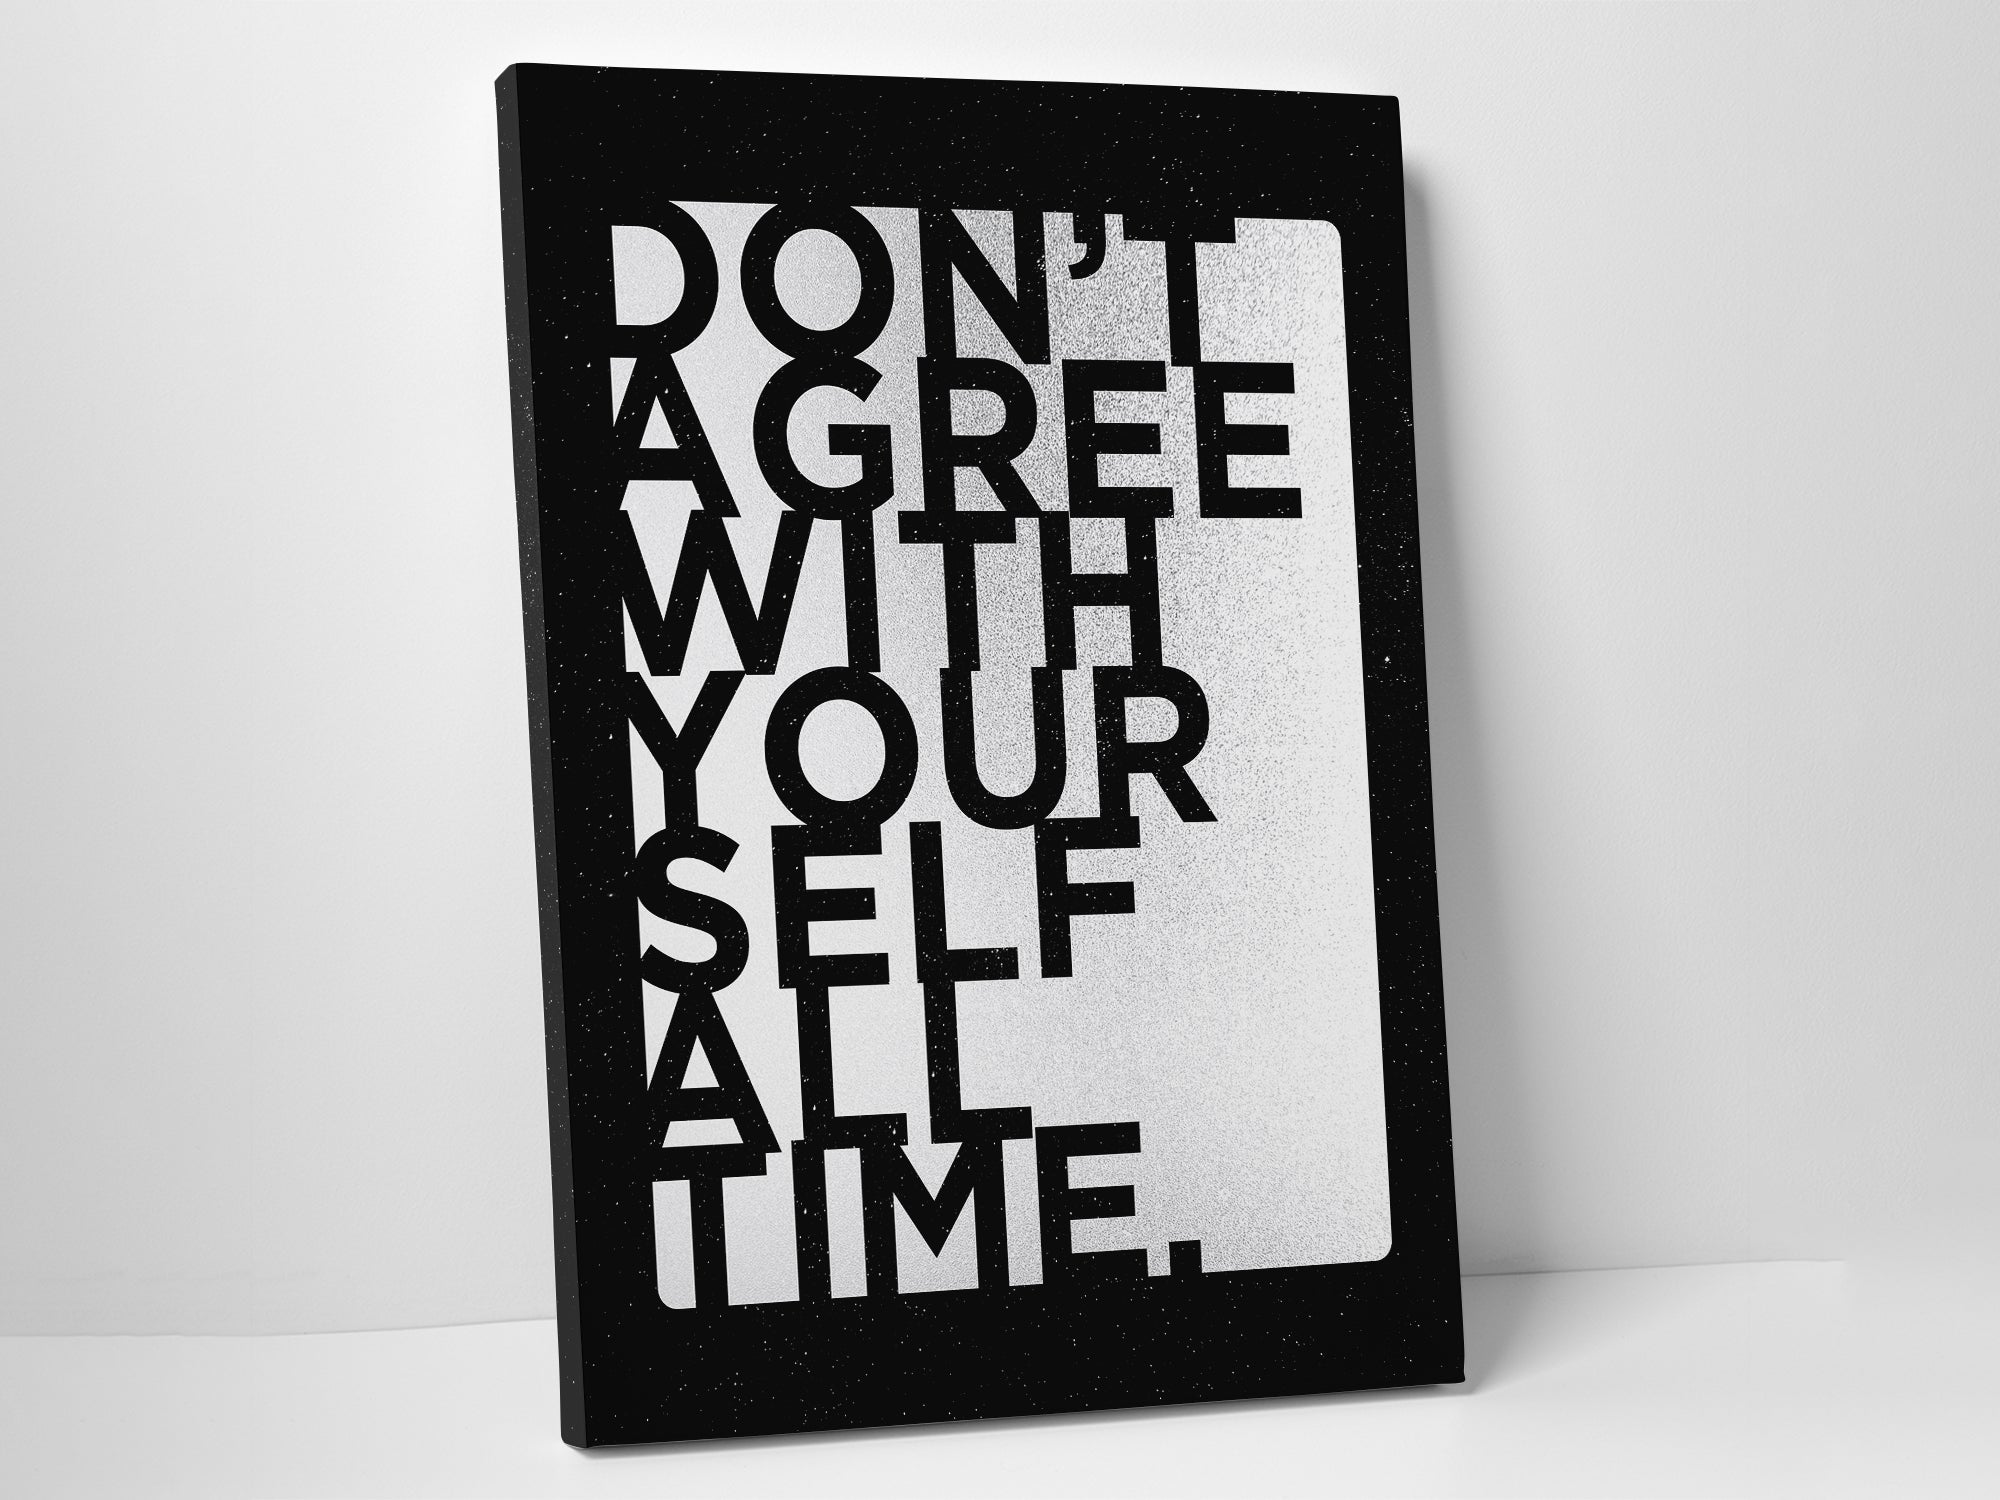 Don't Agree With Your Self All Time - Canvas Wall Art